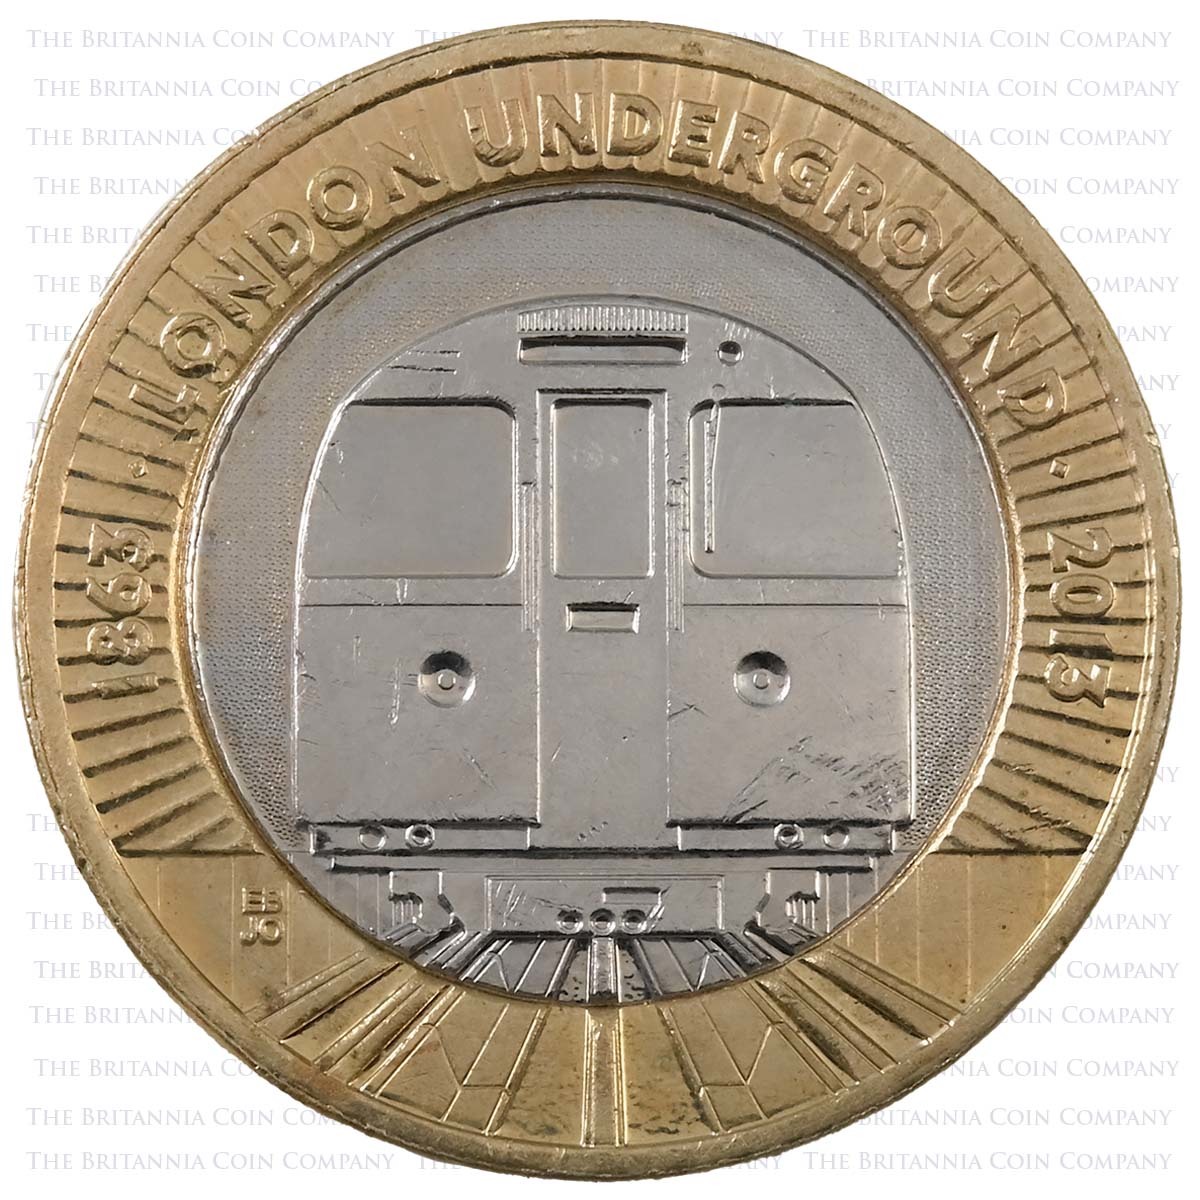 2013 London Underground Tube Train Circulated Two Pound Coin Reverse